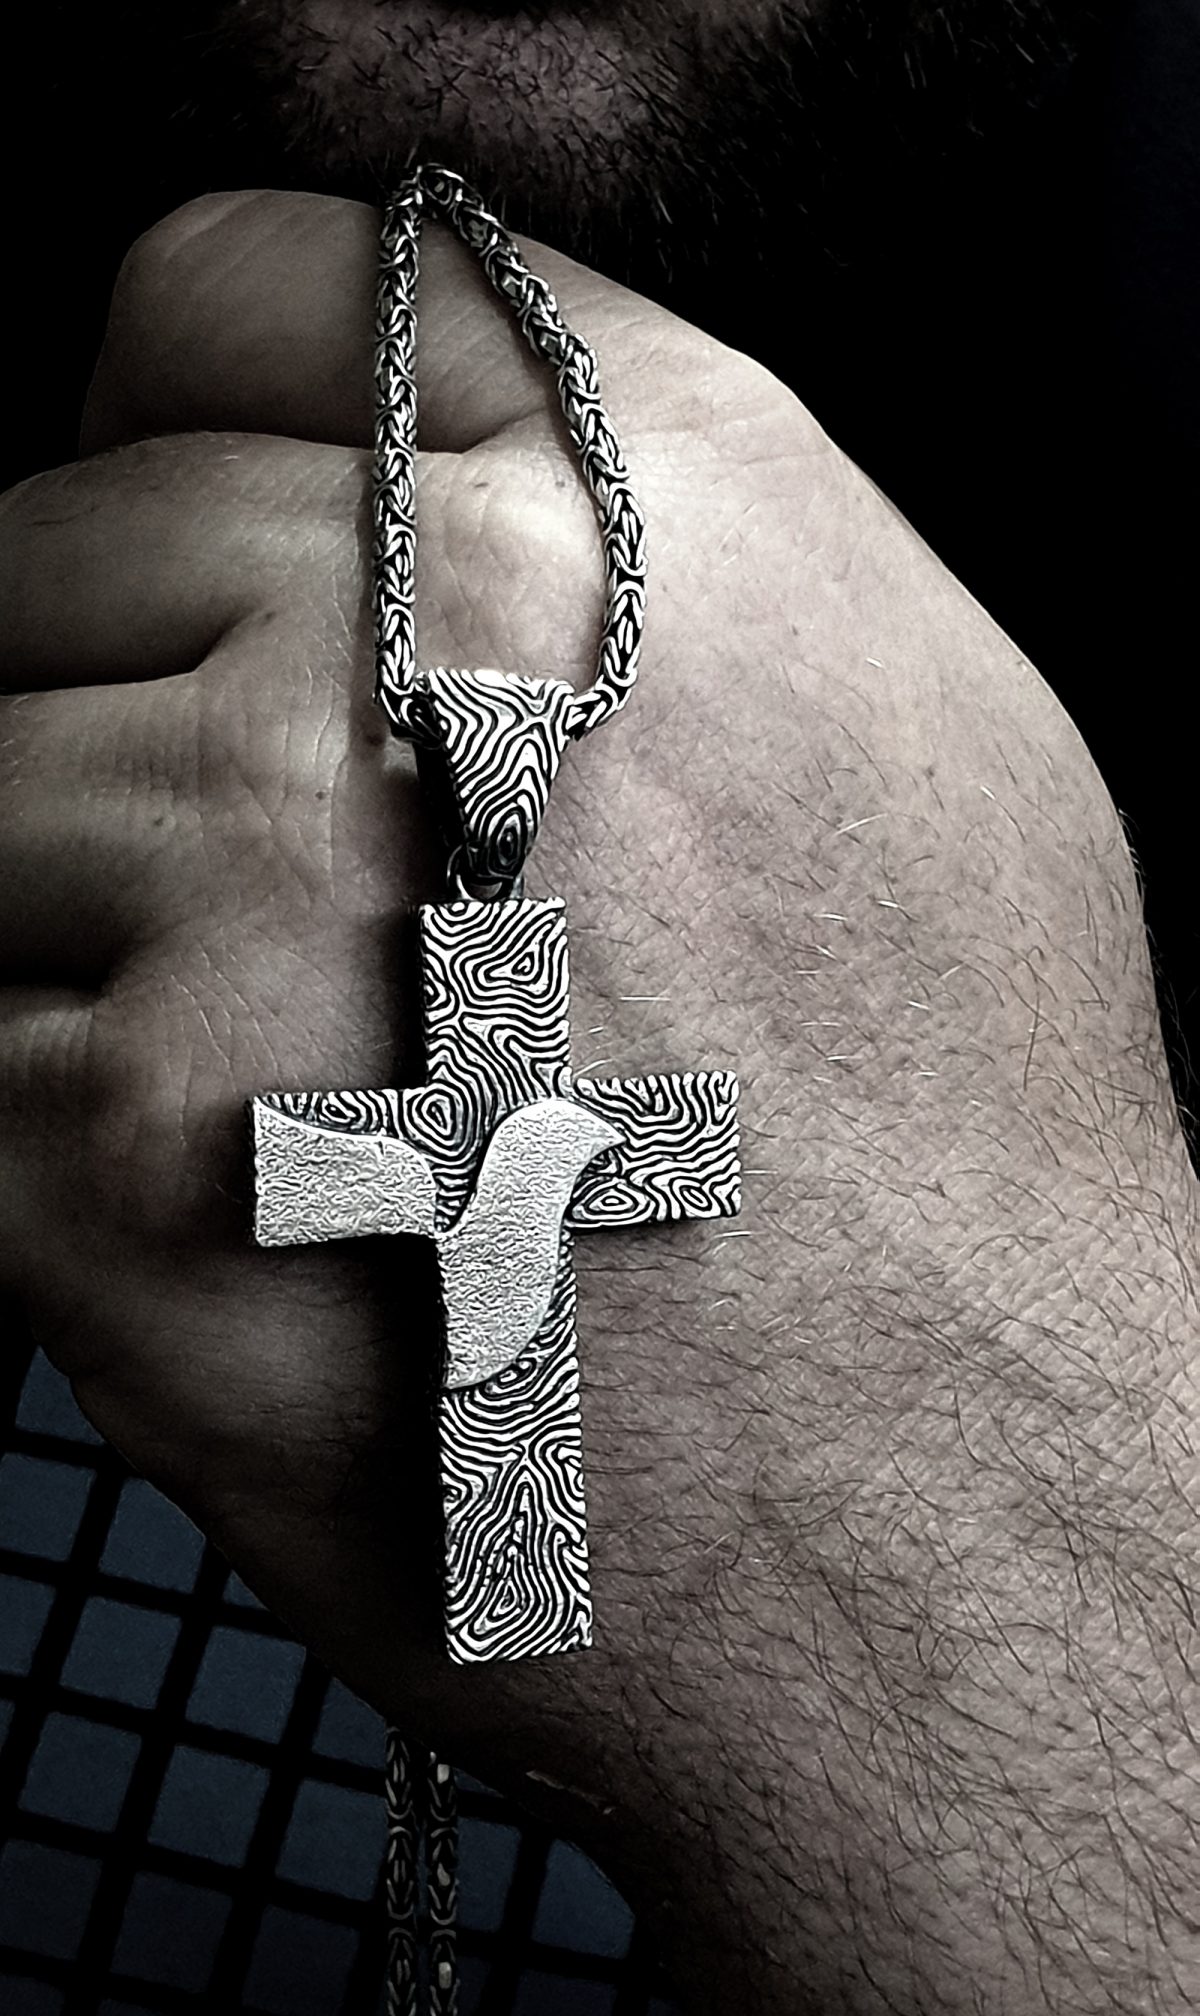 Large Armenian Cross with Dove, Sterling Silver 925 Double-Sided Cross Pendant, Religious Gift